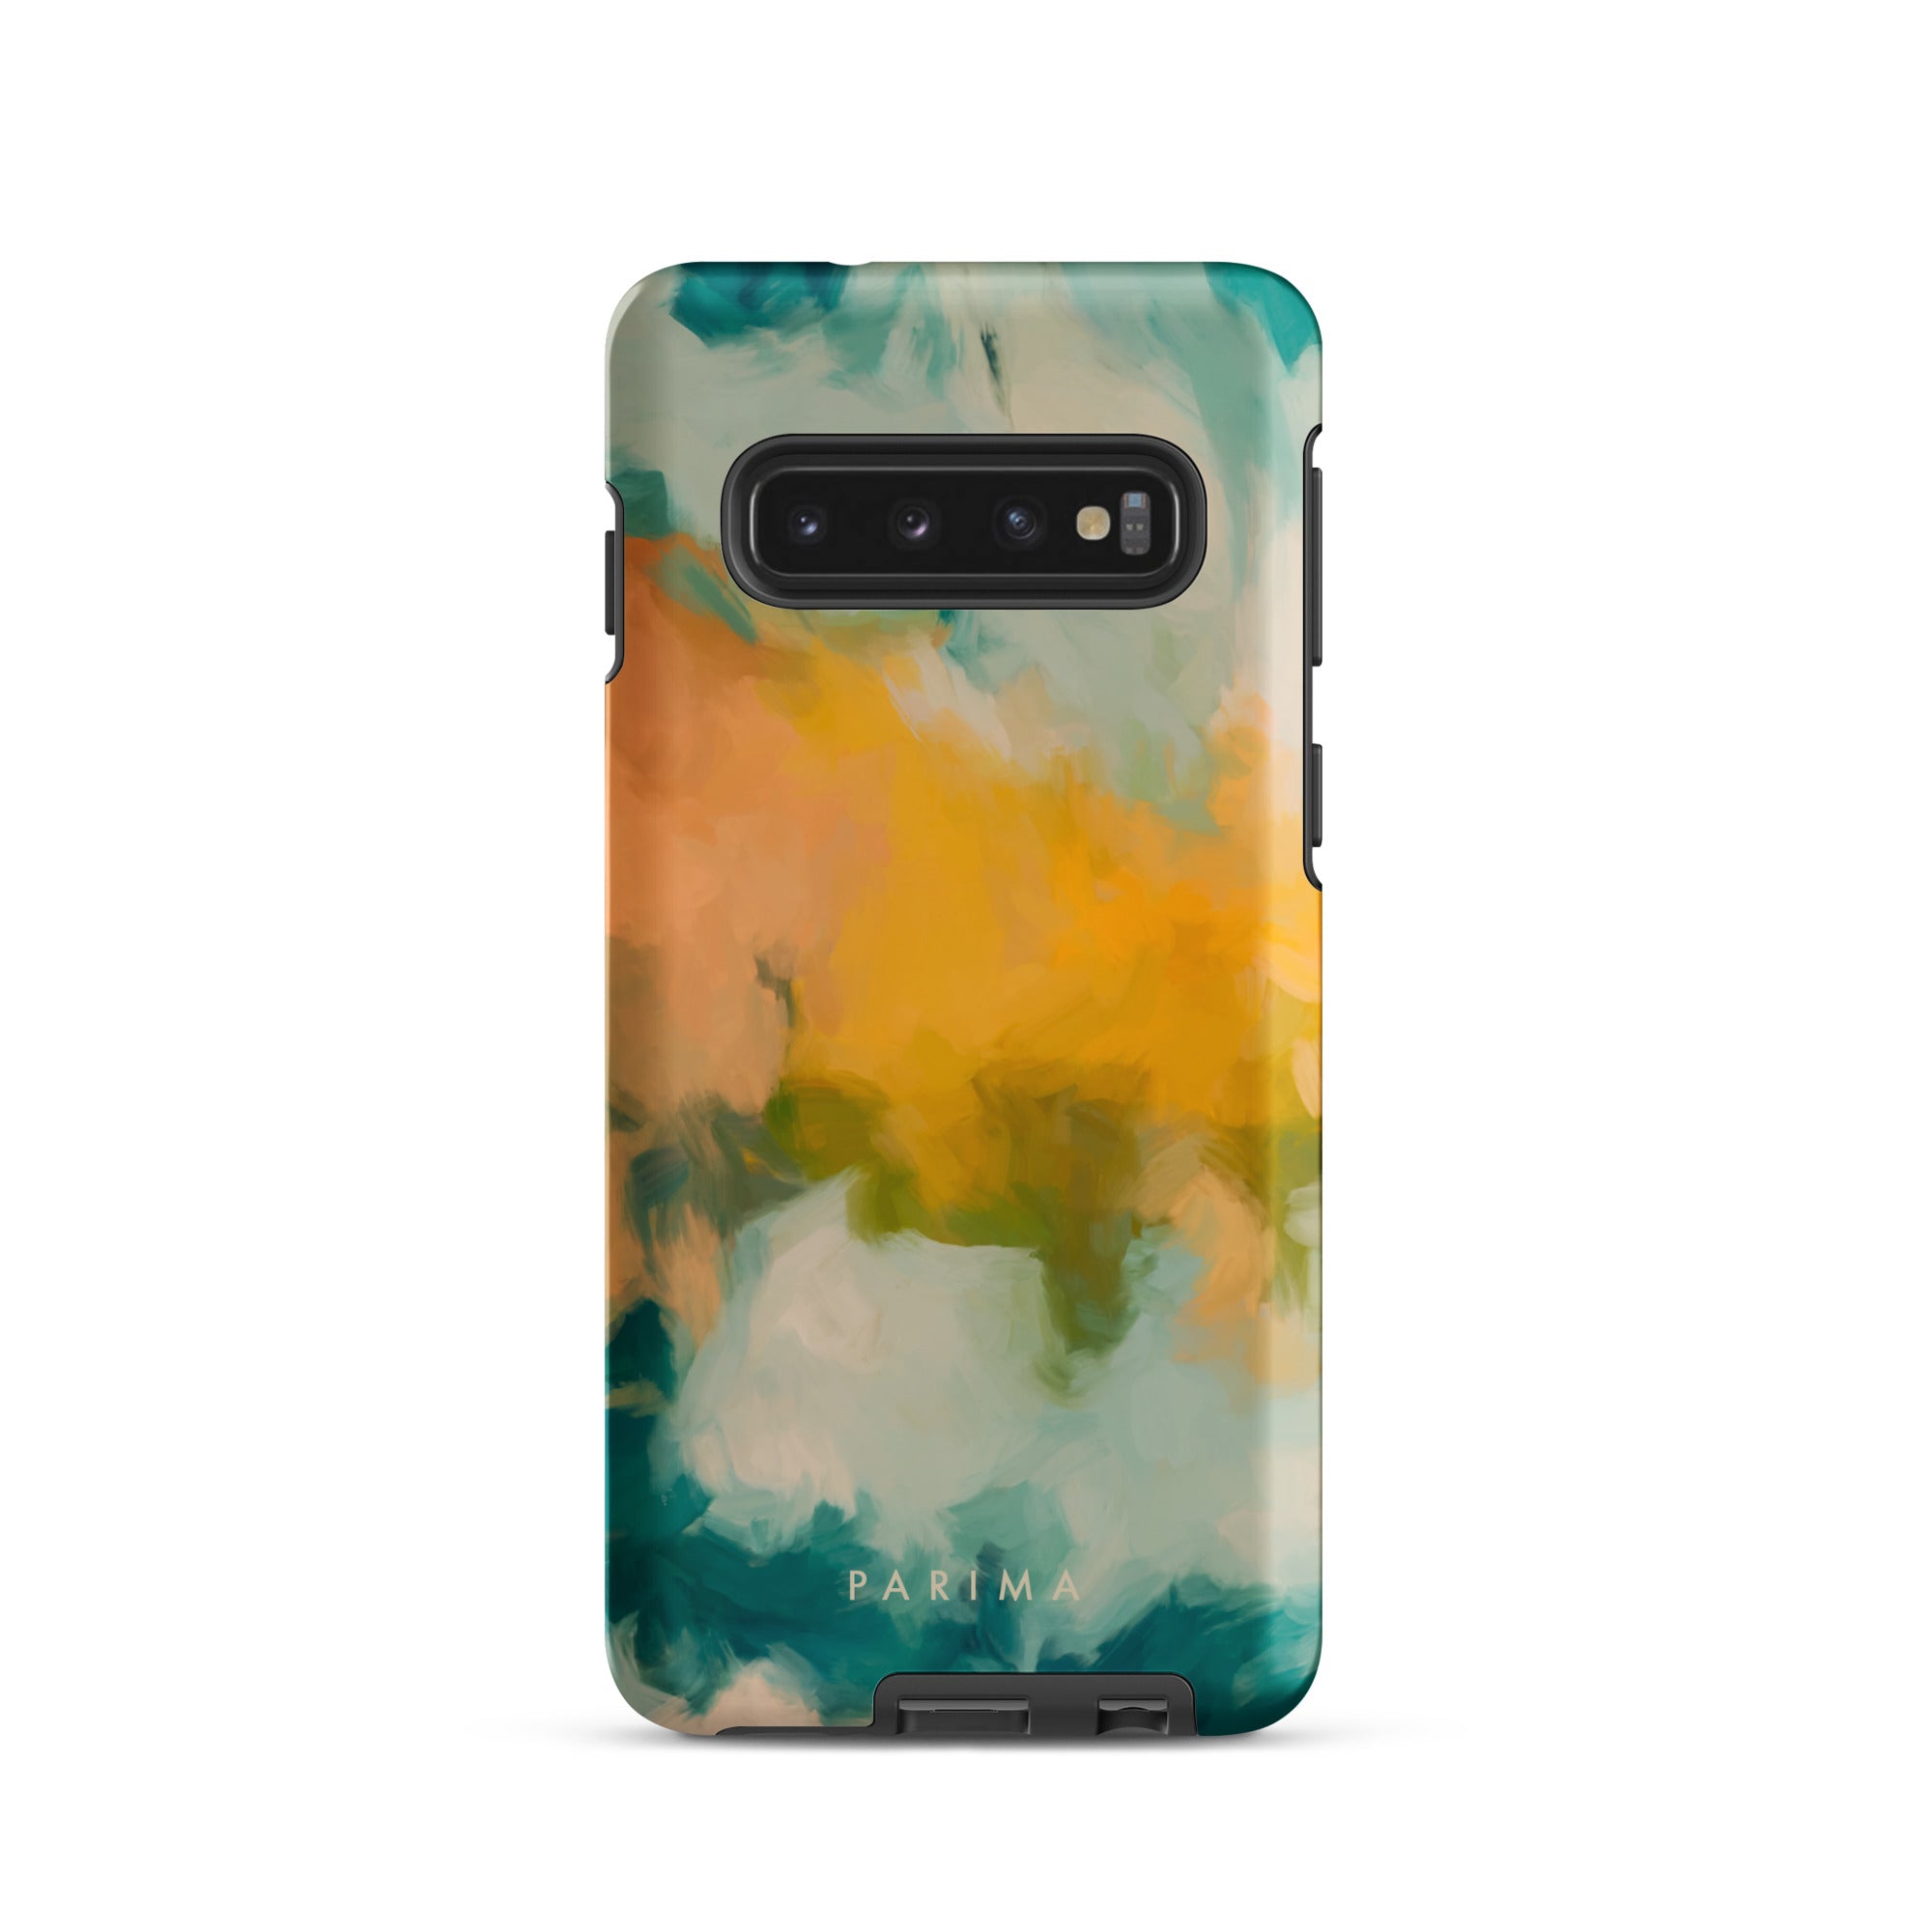 Beach Day, blue and yellow abstract art on Samsung Galaxy S10 tough case by Parima Studio